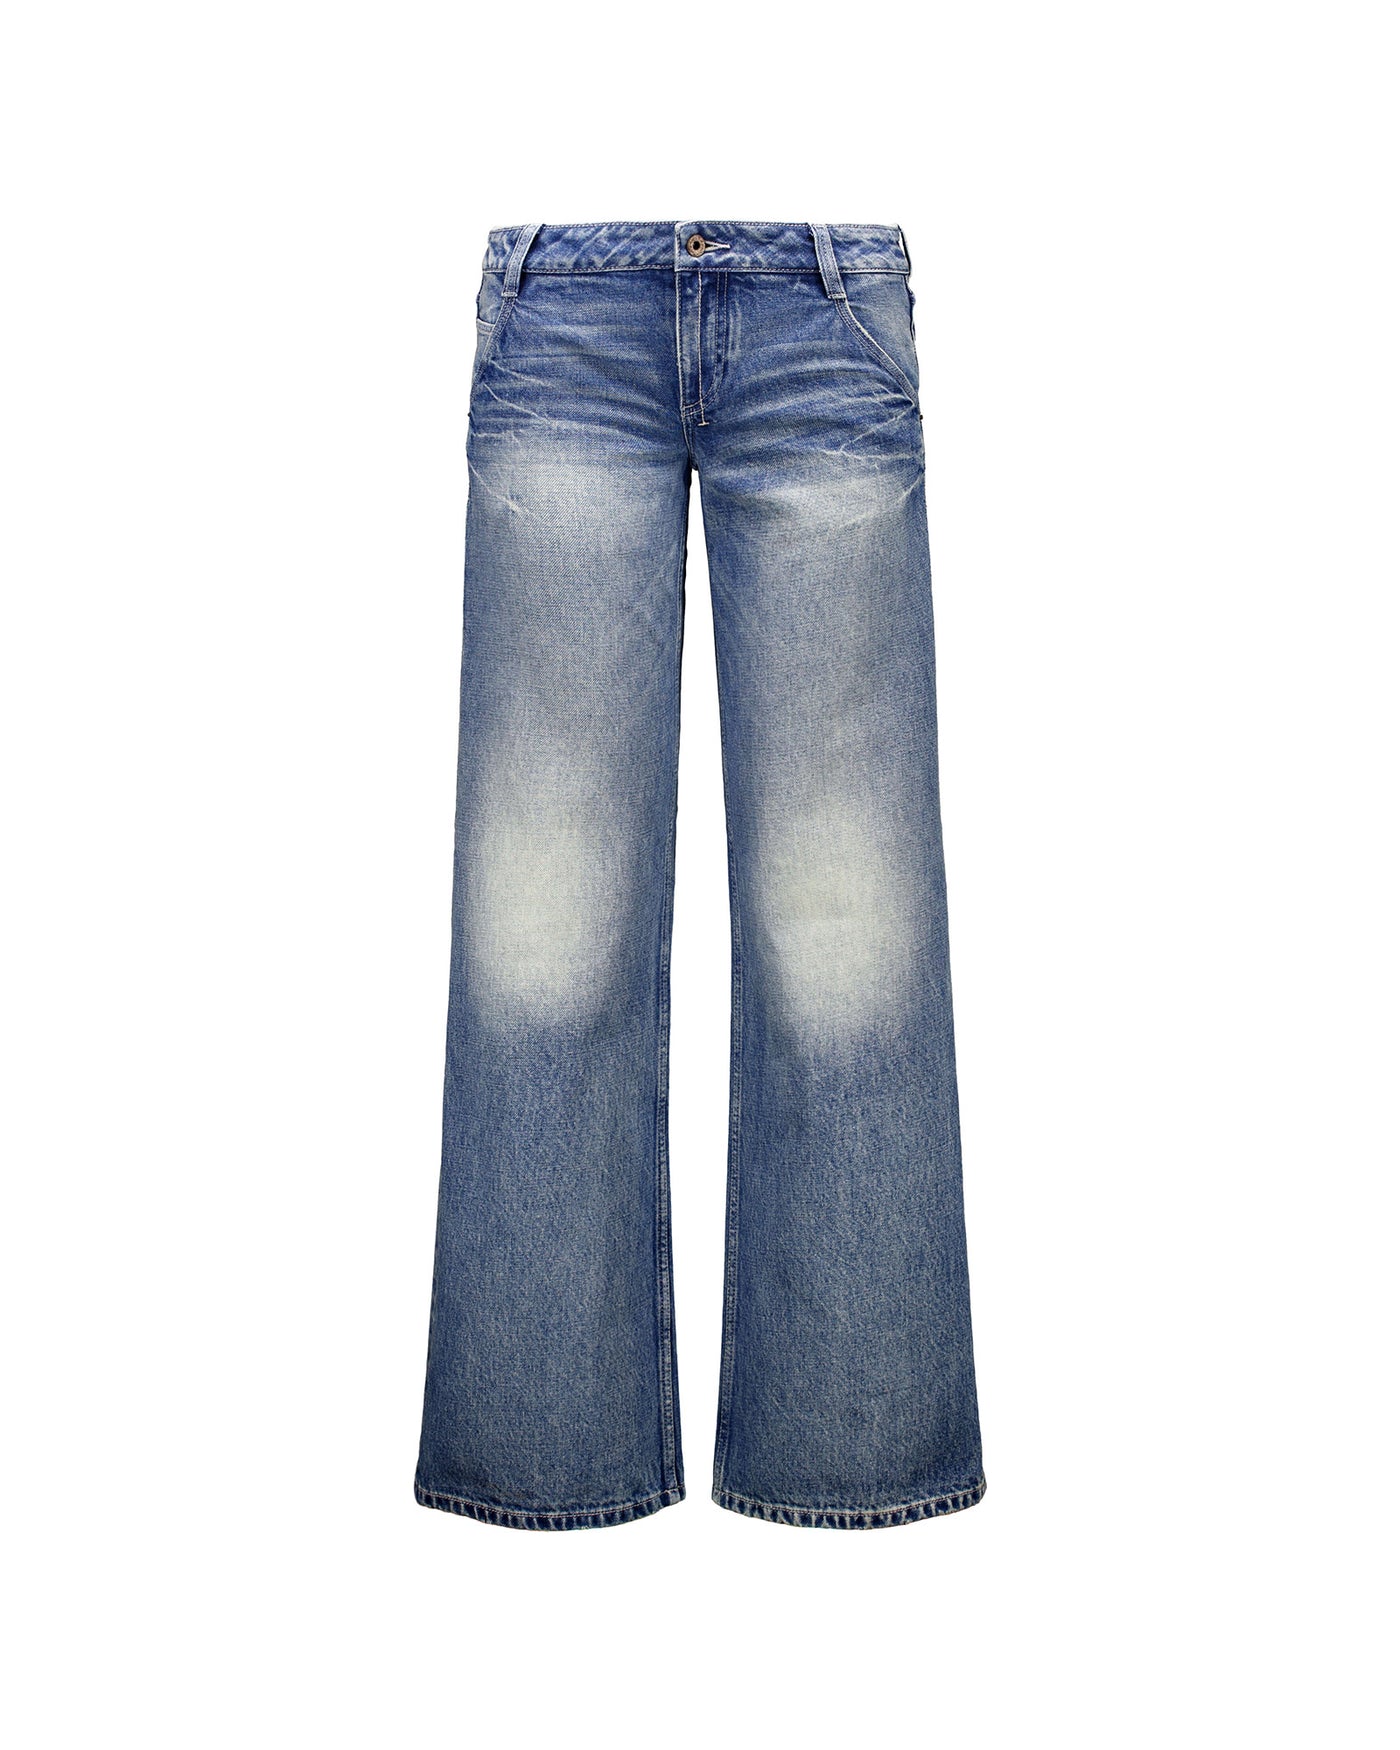 "888" Low-Rise Loose Jeans